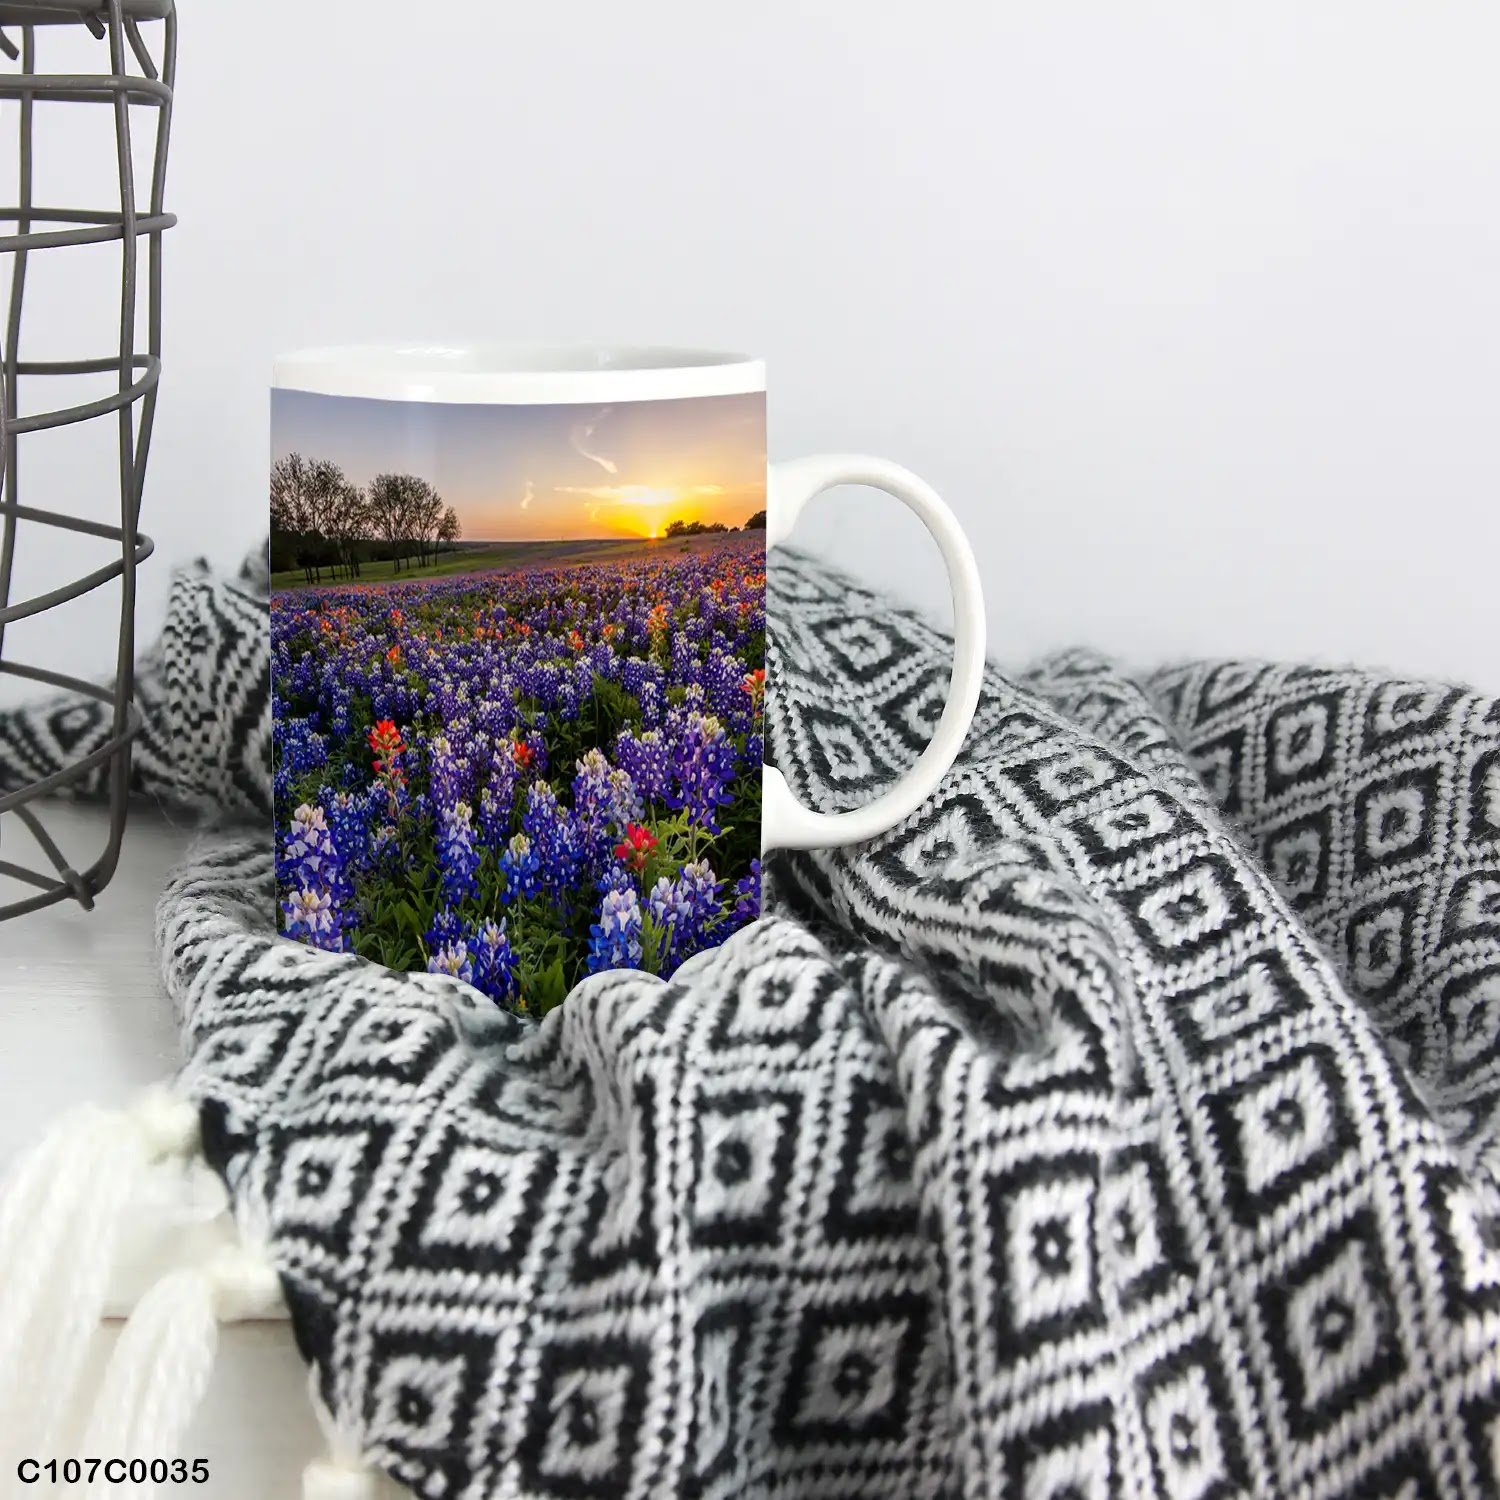 A mug (cup) printed with an image of lavender field